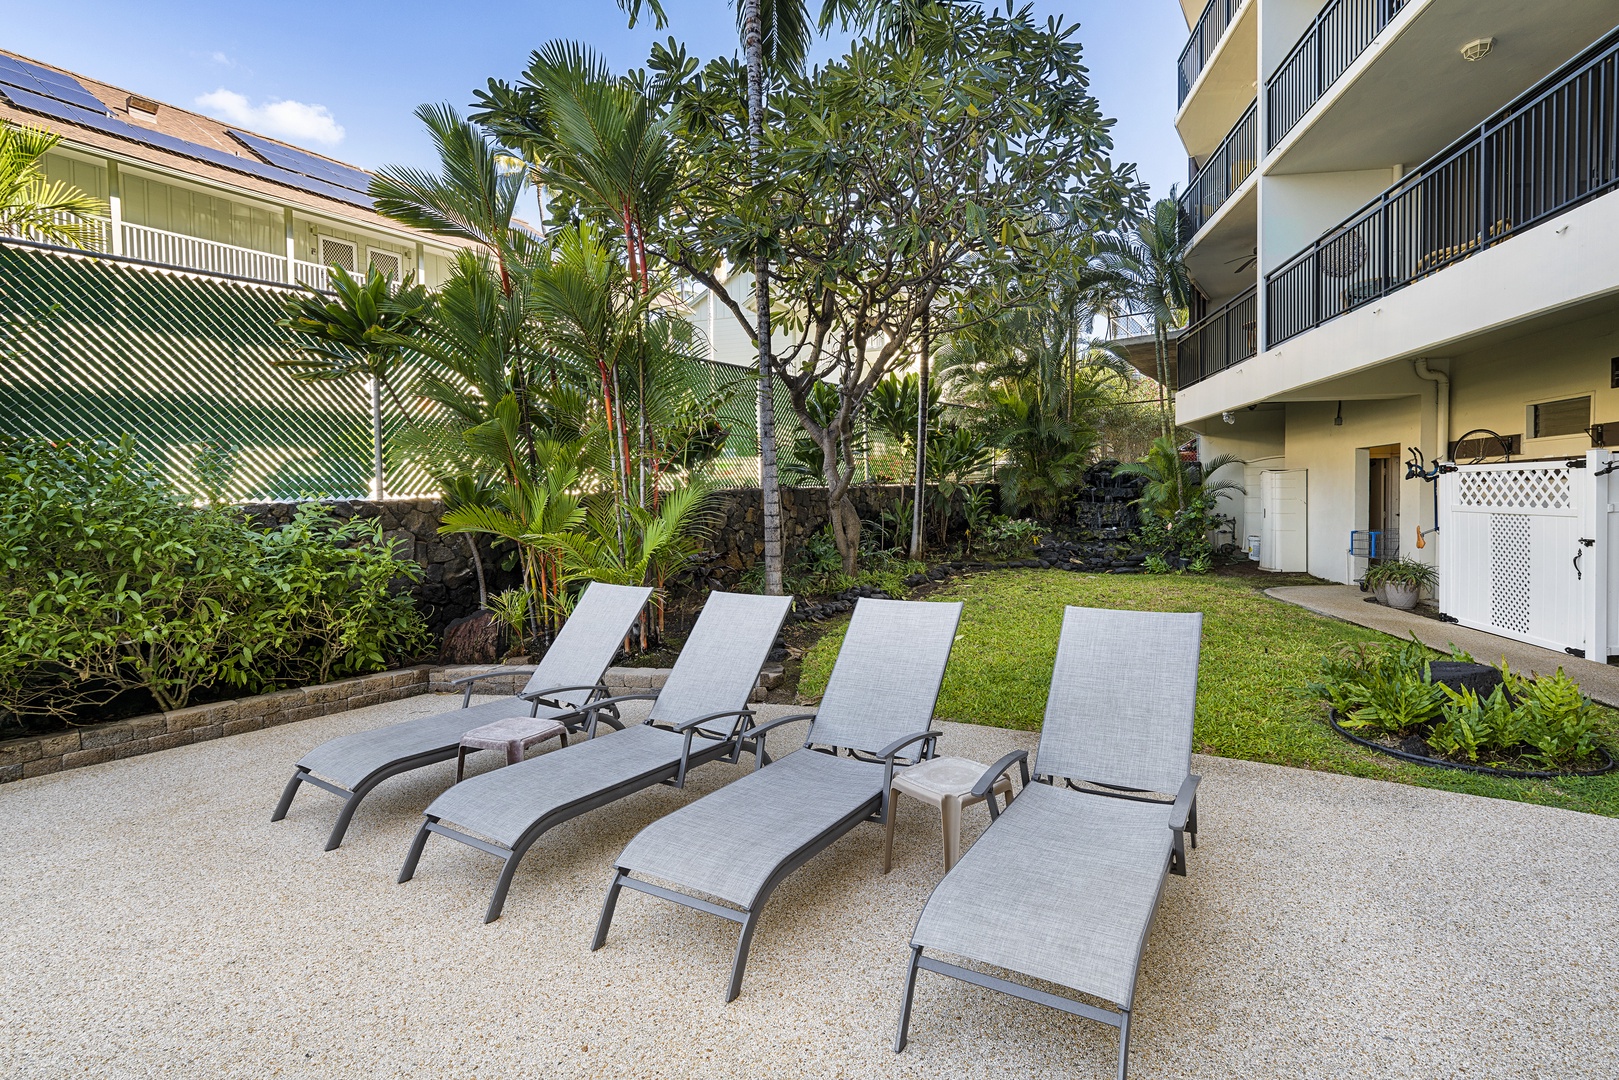 Kailua Kona Vacation Rentals, Kona Alii 201 - Relax on one of many loungers at the common area pool!